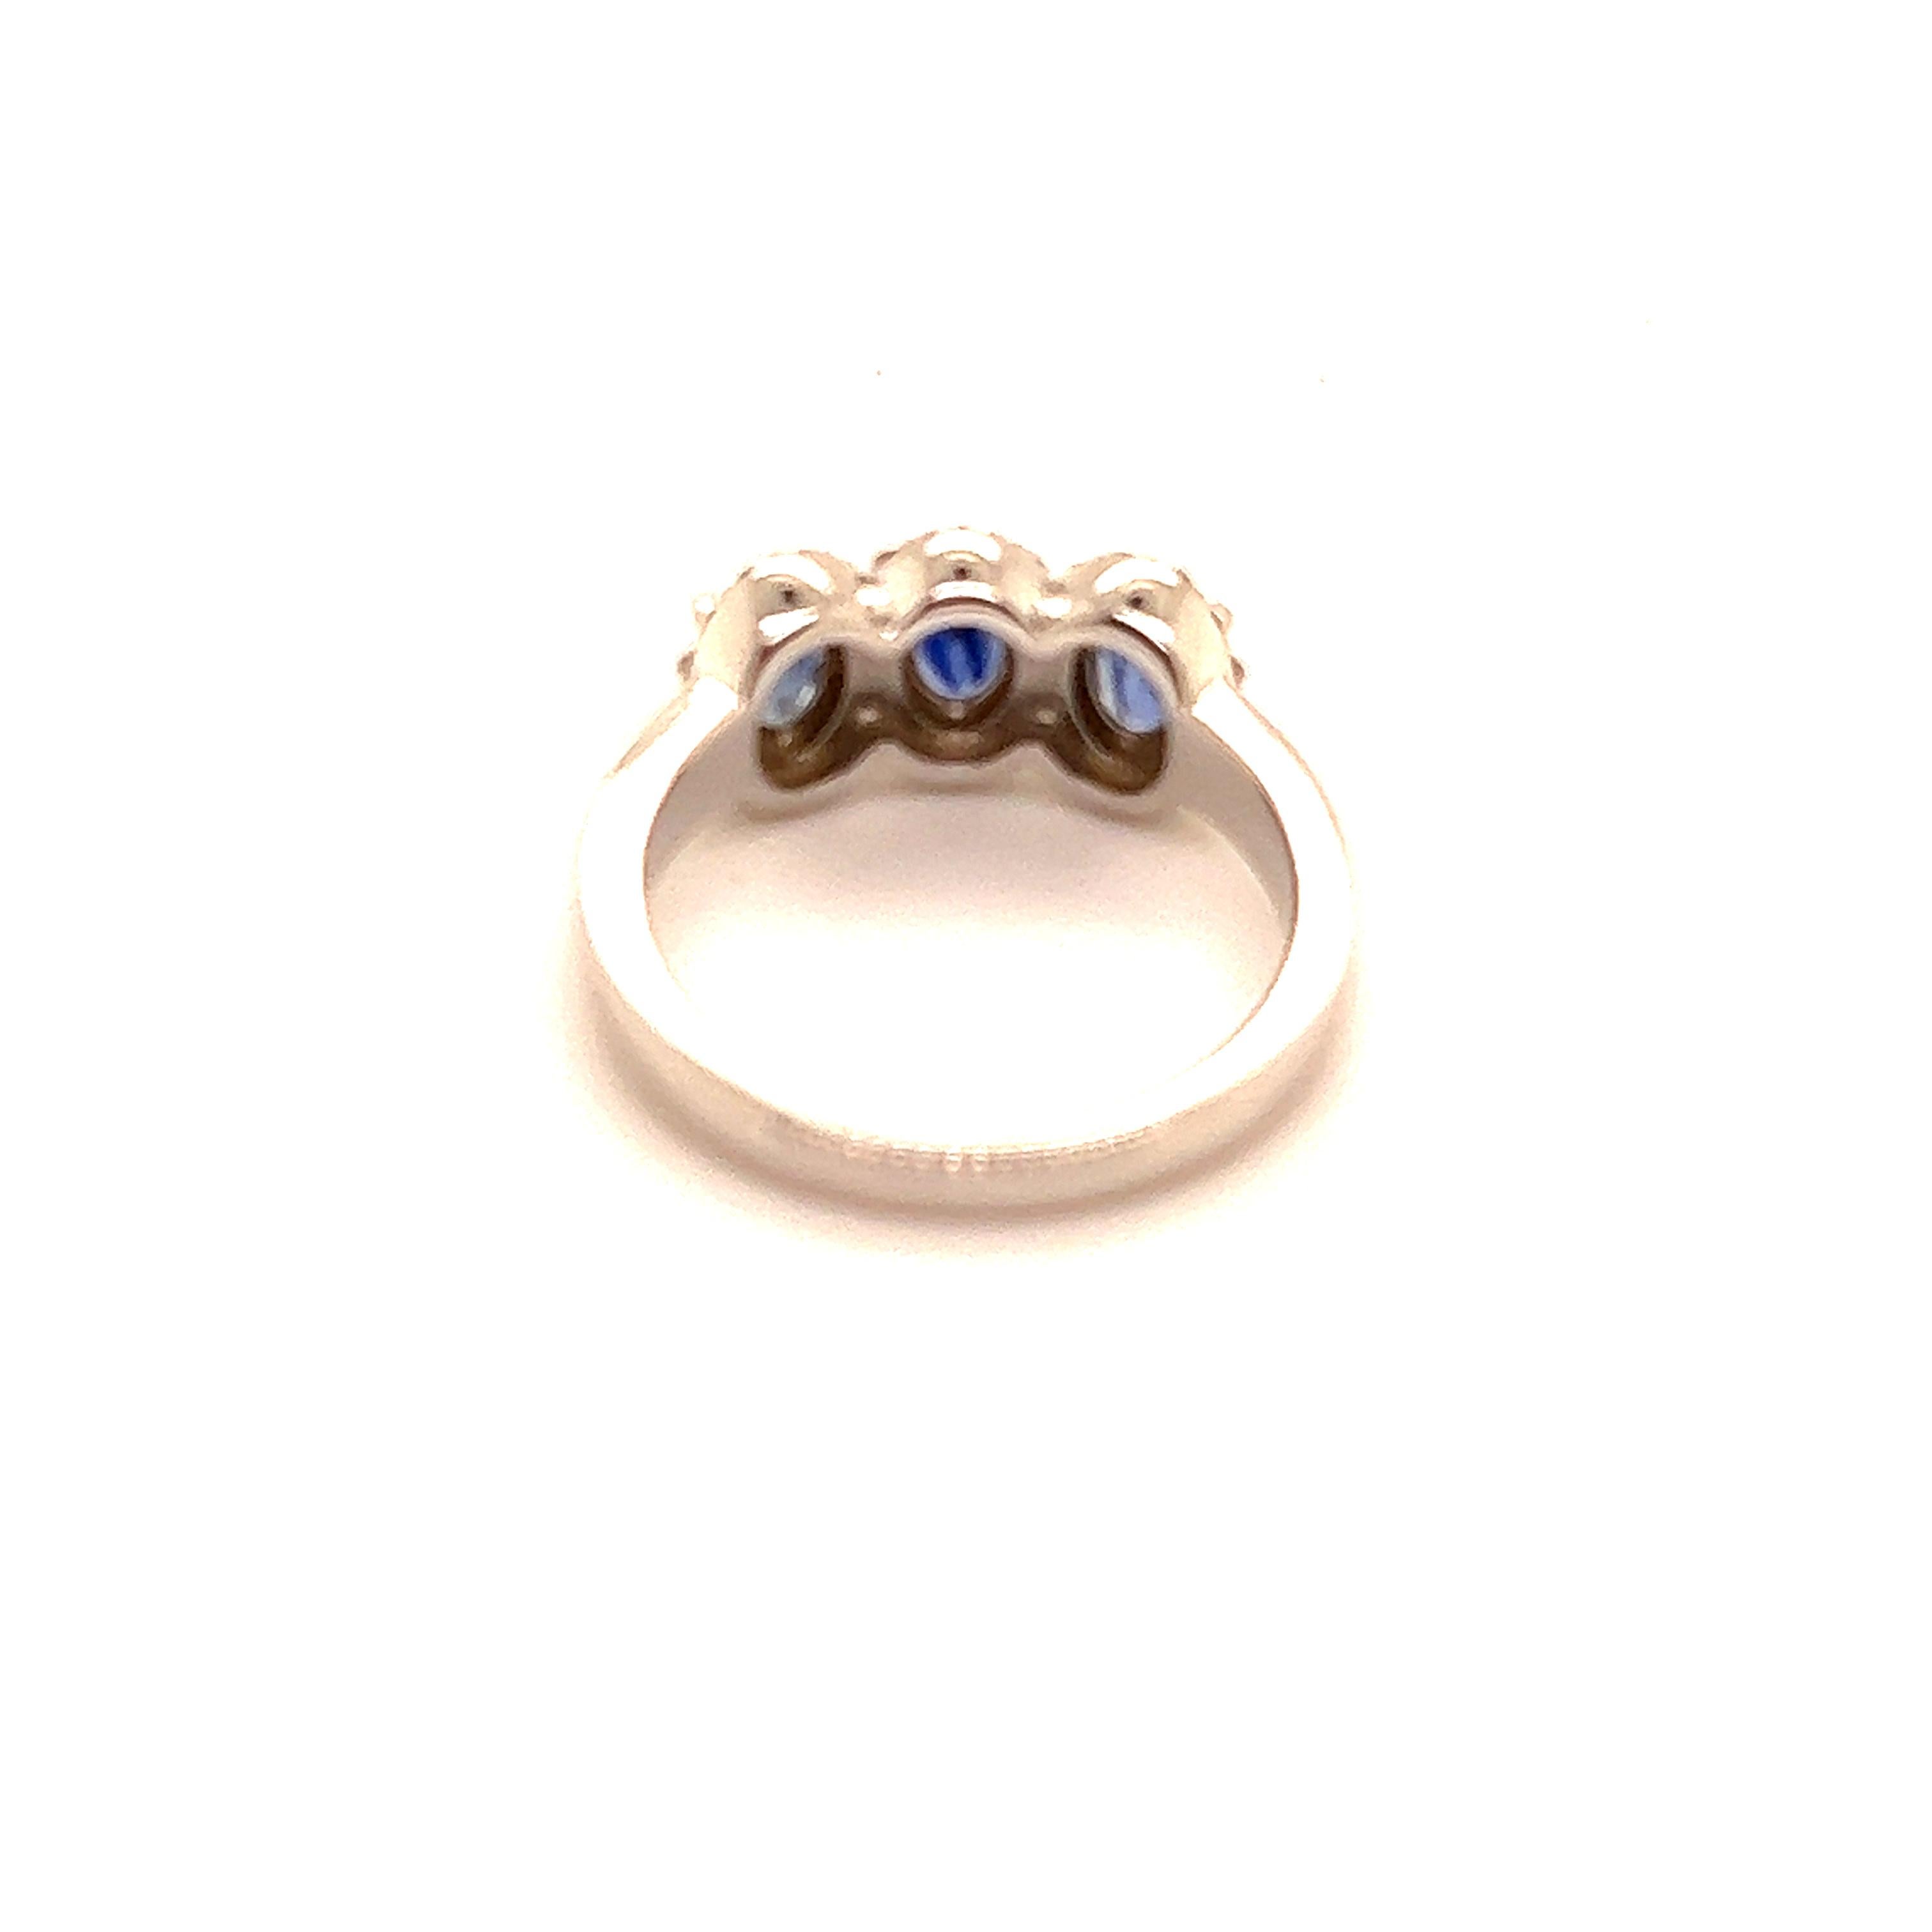 Oval Cut Natural Sapphire Diamond Ring 7 14k W Gold 1.67 TCW Certified For Sale